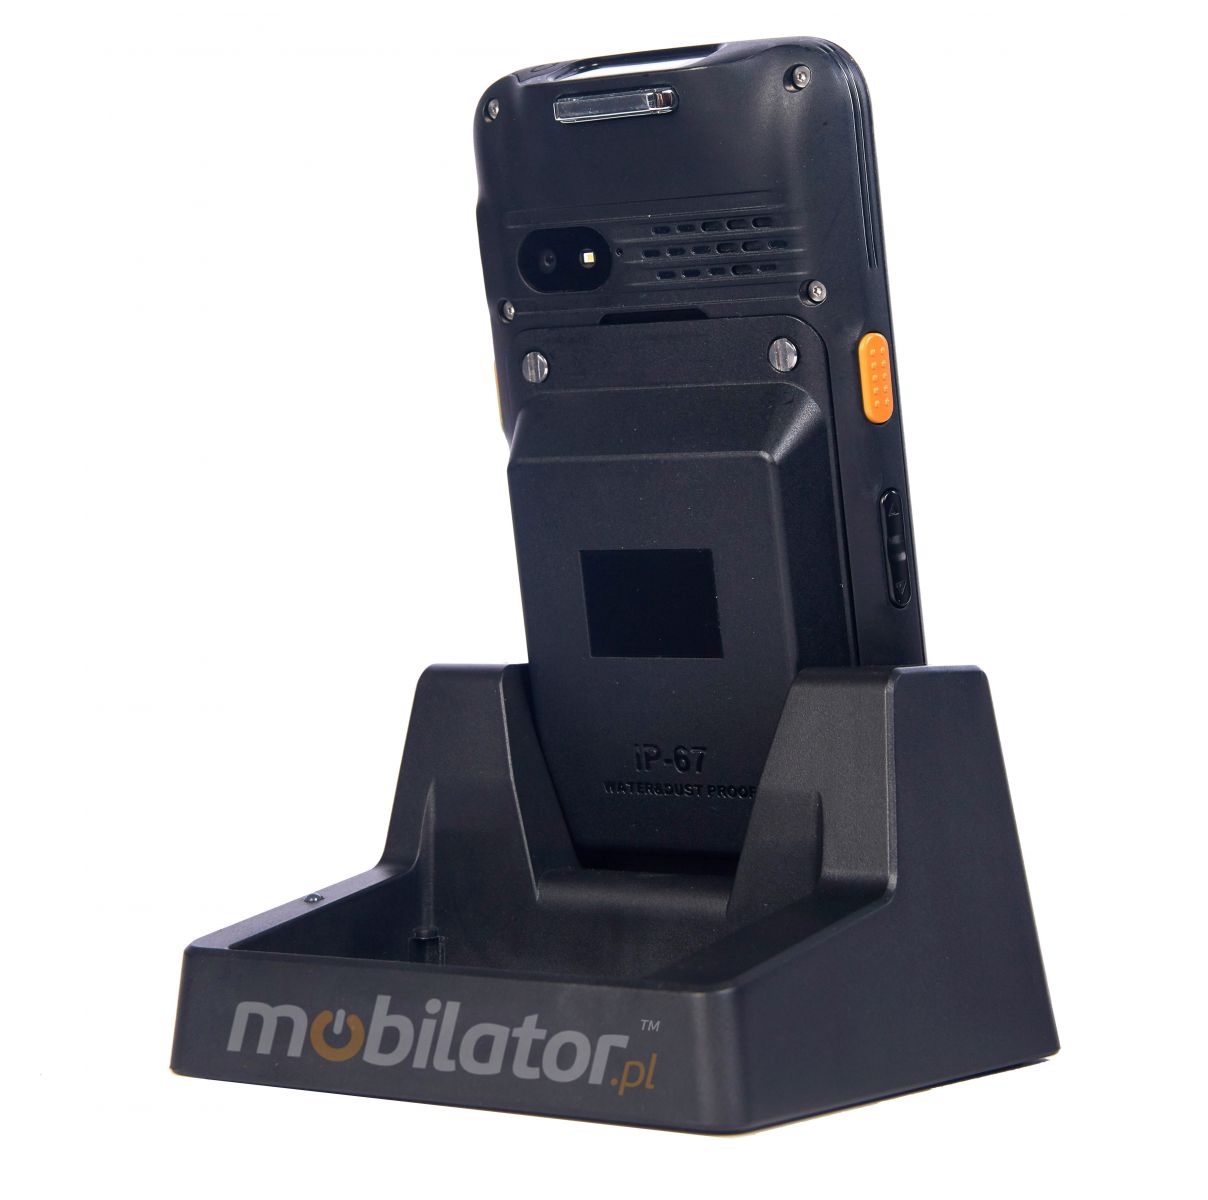 MobiPad V77 v.2 - Waterproof (IP67) data collector with NFC technology and a 2D scanner (SE4710) with a pistol grip